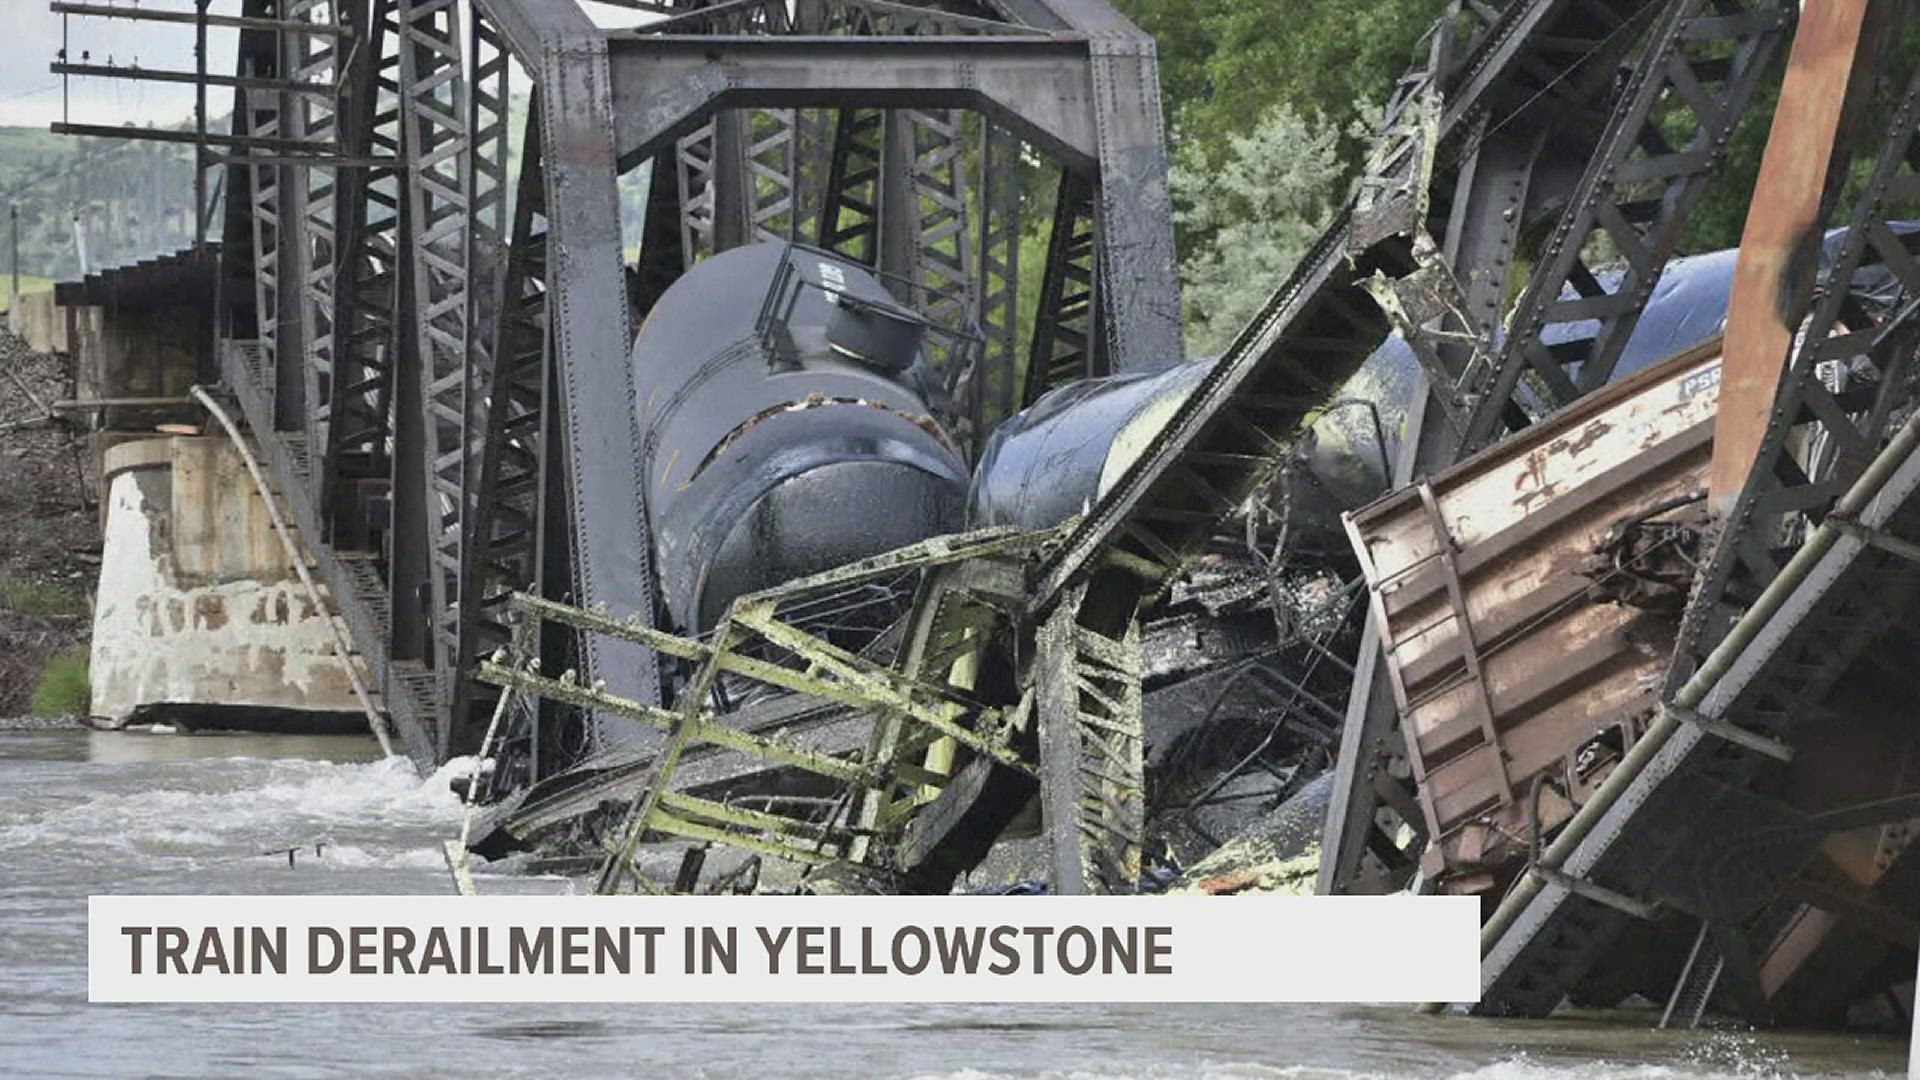 This week Montana workers are beginning to clean up the damage caused by a train derailment.